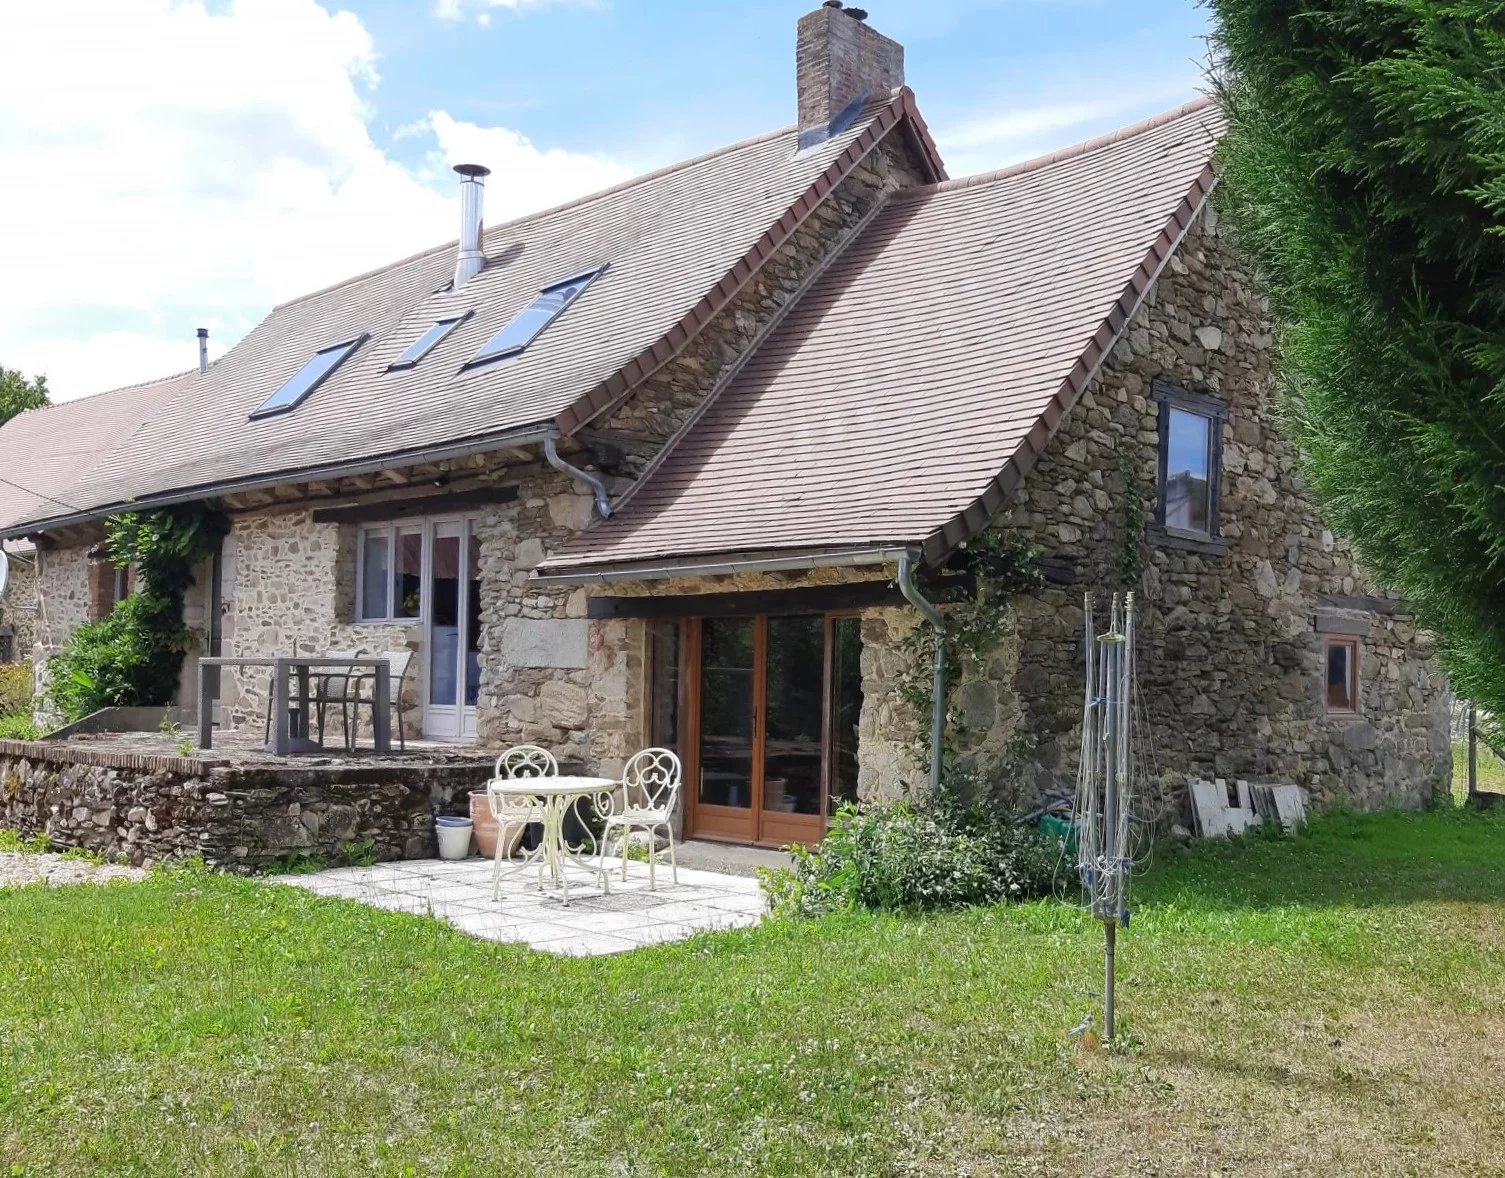 Well presented house, barn, animal outhouse, plus hanger. Well, land 7500m²